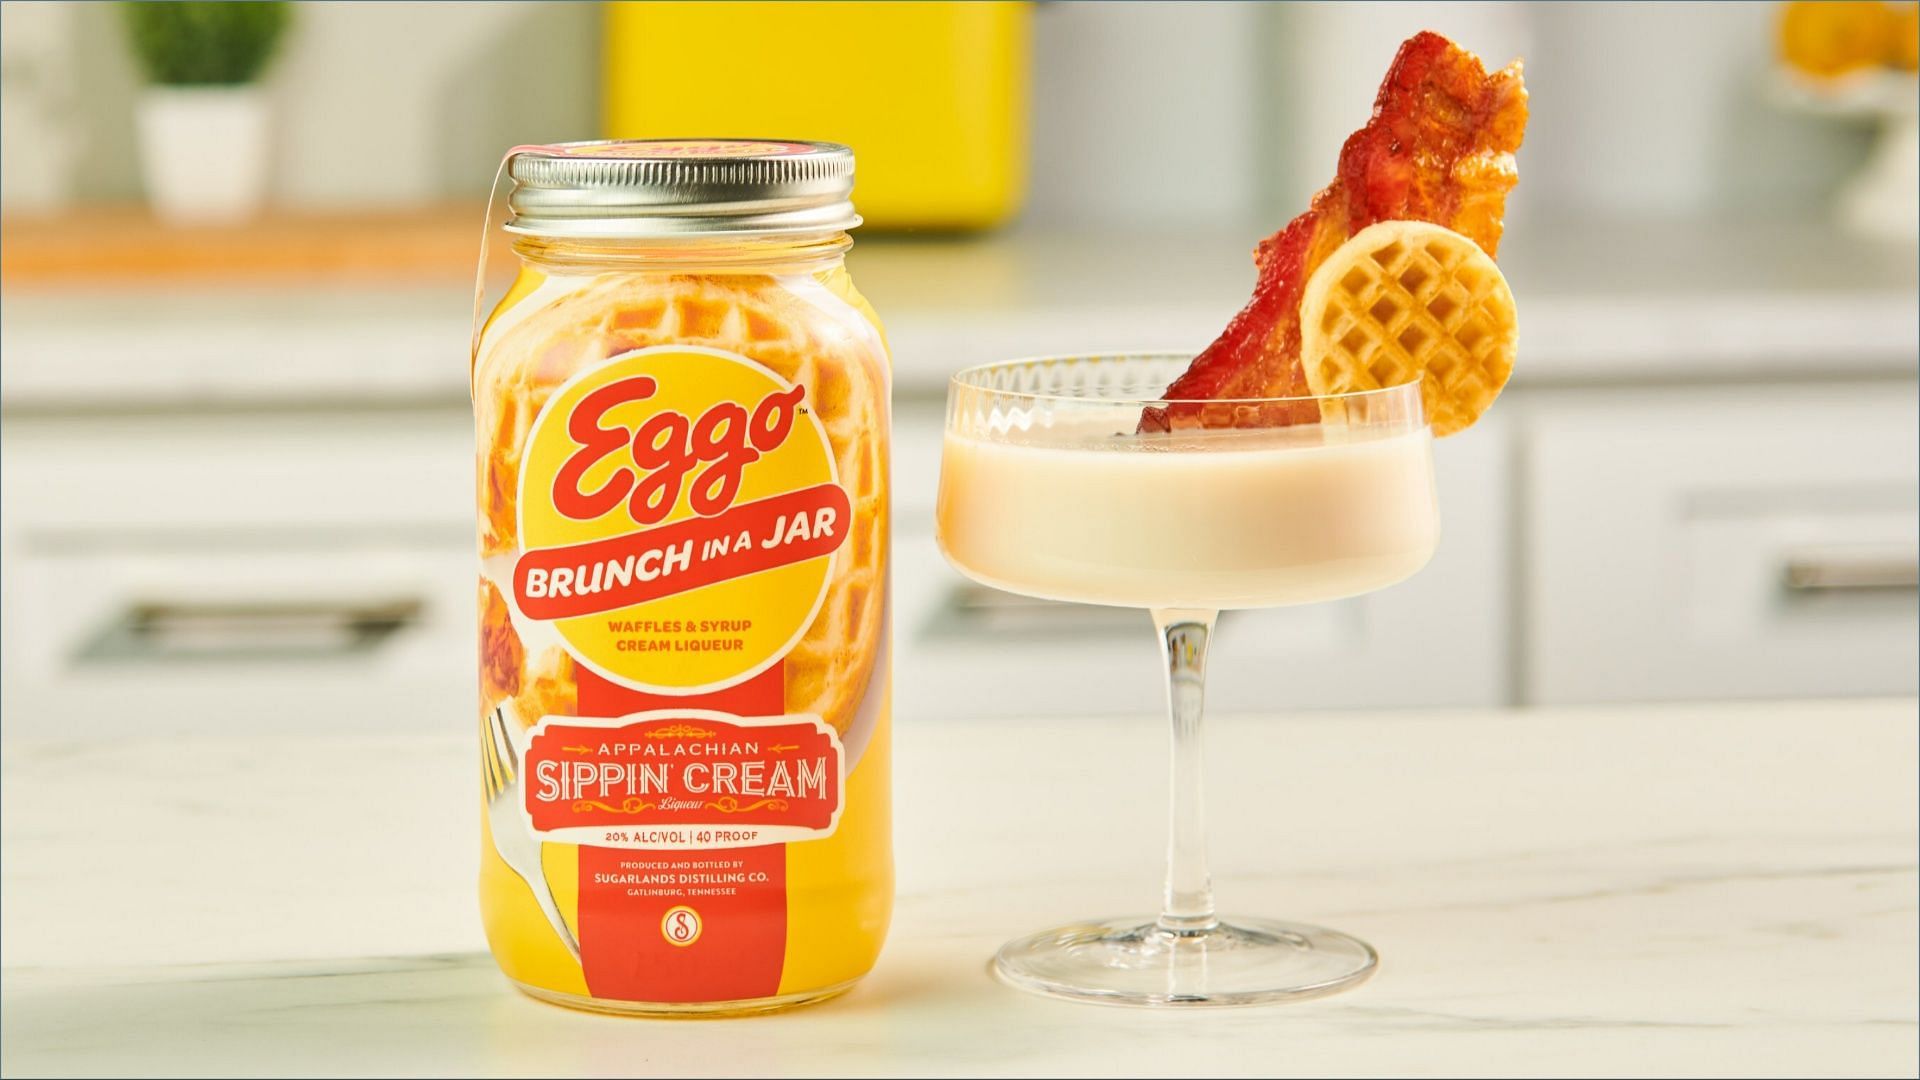 The new Brunch in a Jar Sippin&#039; Cream liqueur is available at major retailers starting August 15 and onwards (Image via Kellog&#039;s)